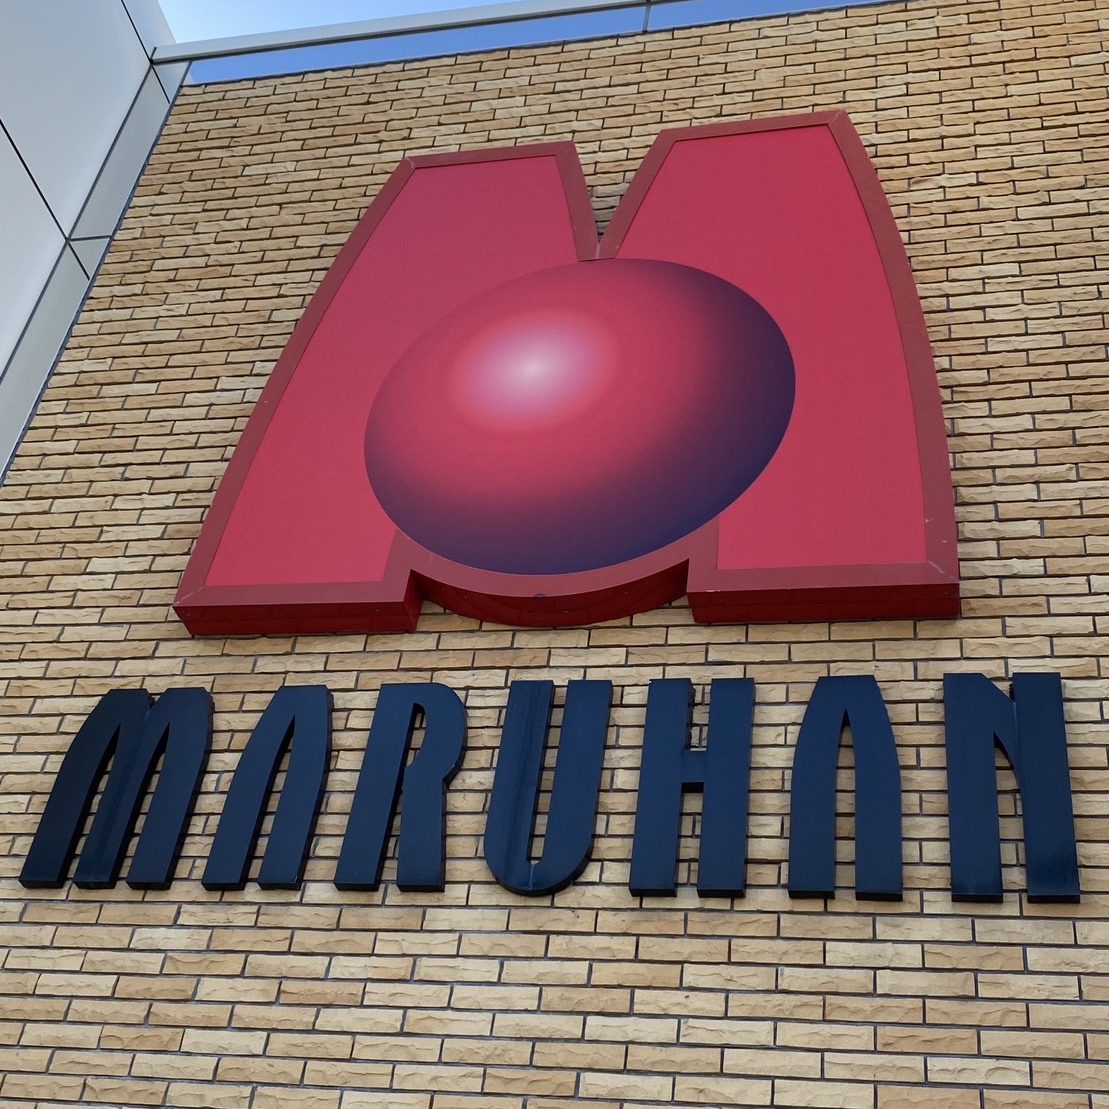 MARUHAN 堺遠里小野店様の施工事例